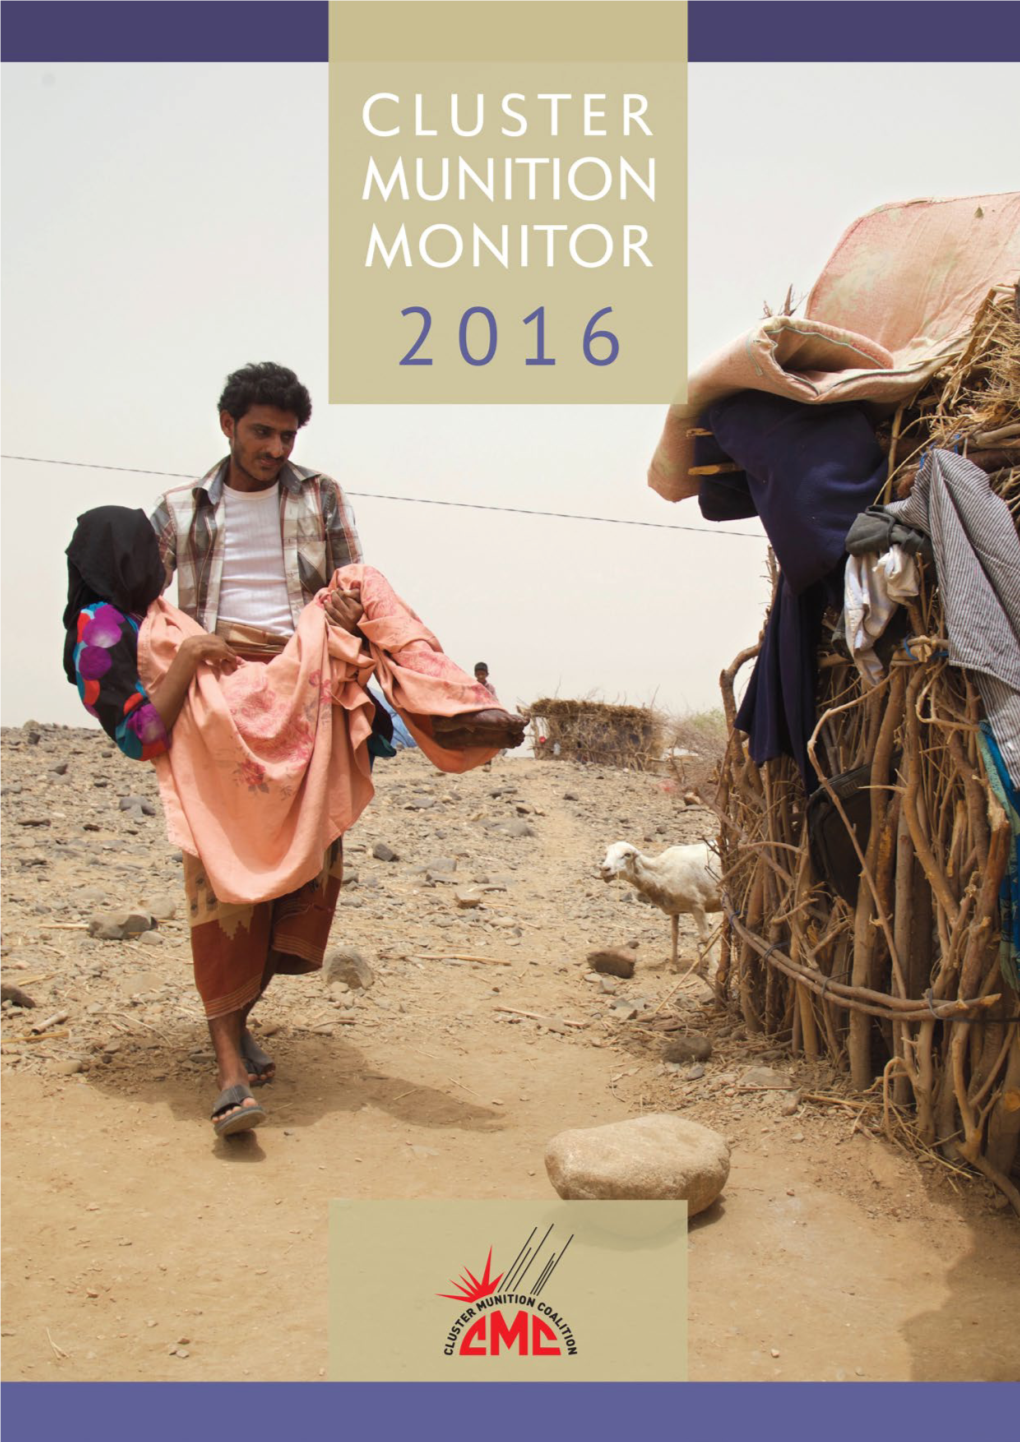 Cluster Munition Monitor 2016